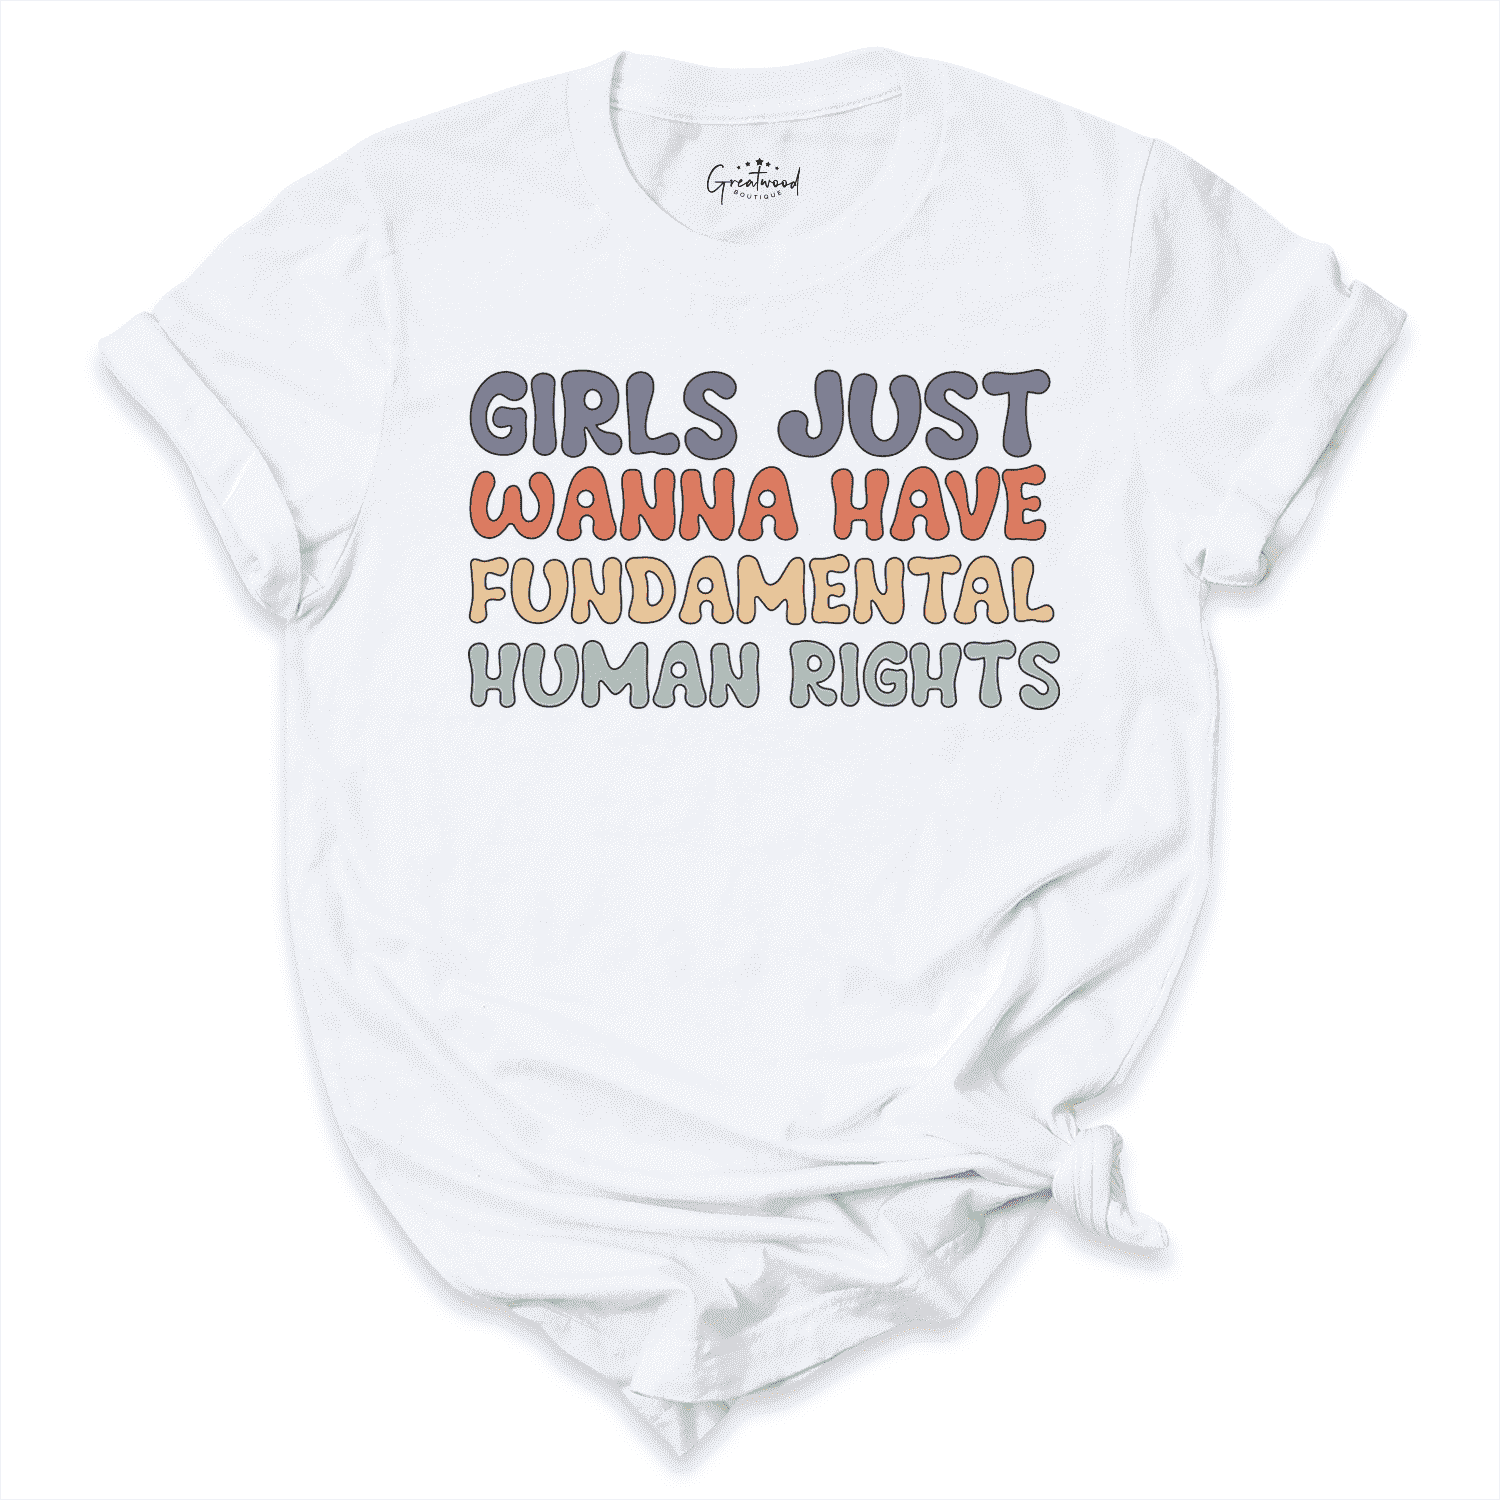 Girls Just Wanna Have Fundamental Human Rights Shirt White - Greatwood Boutique